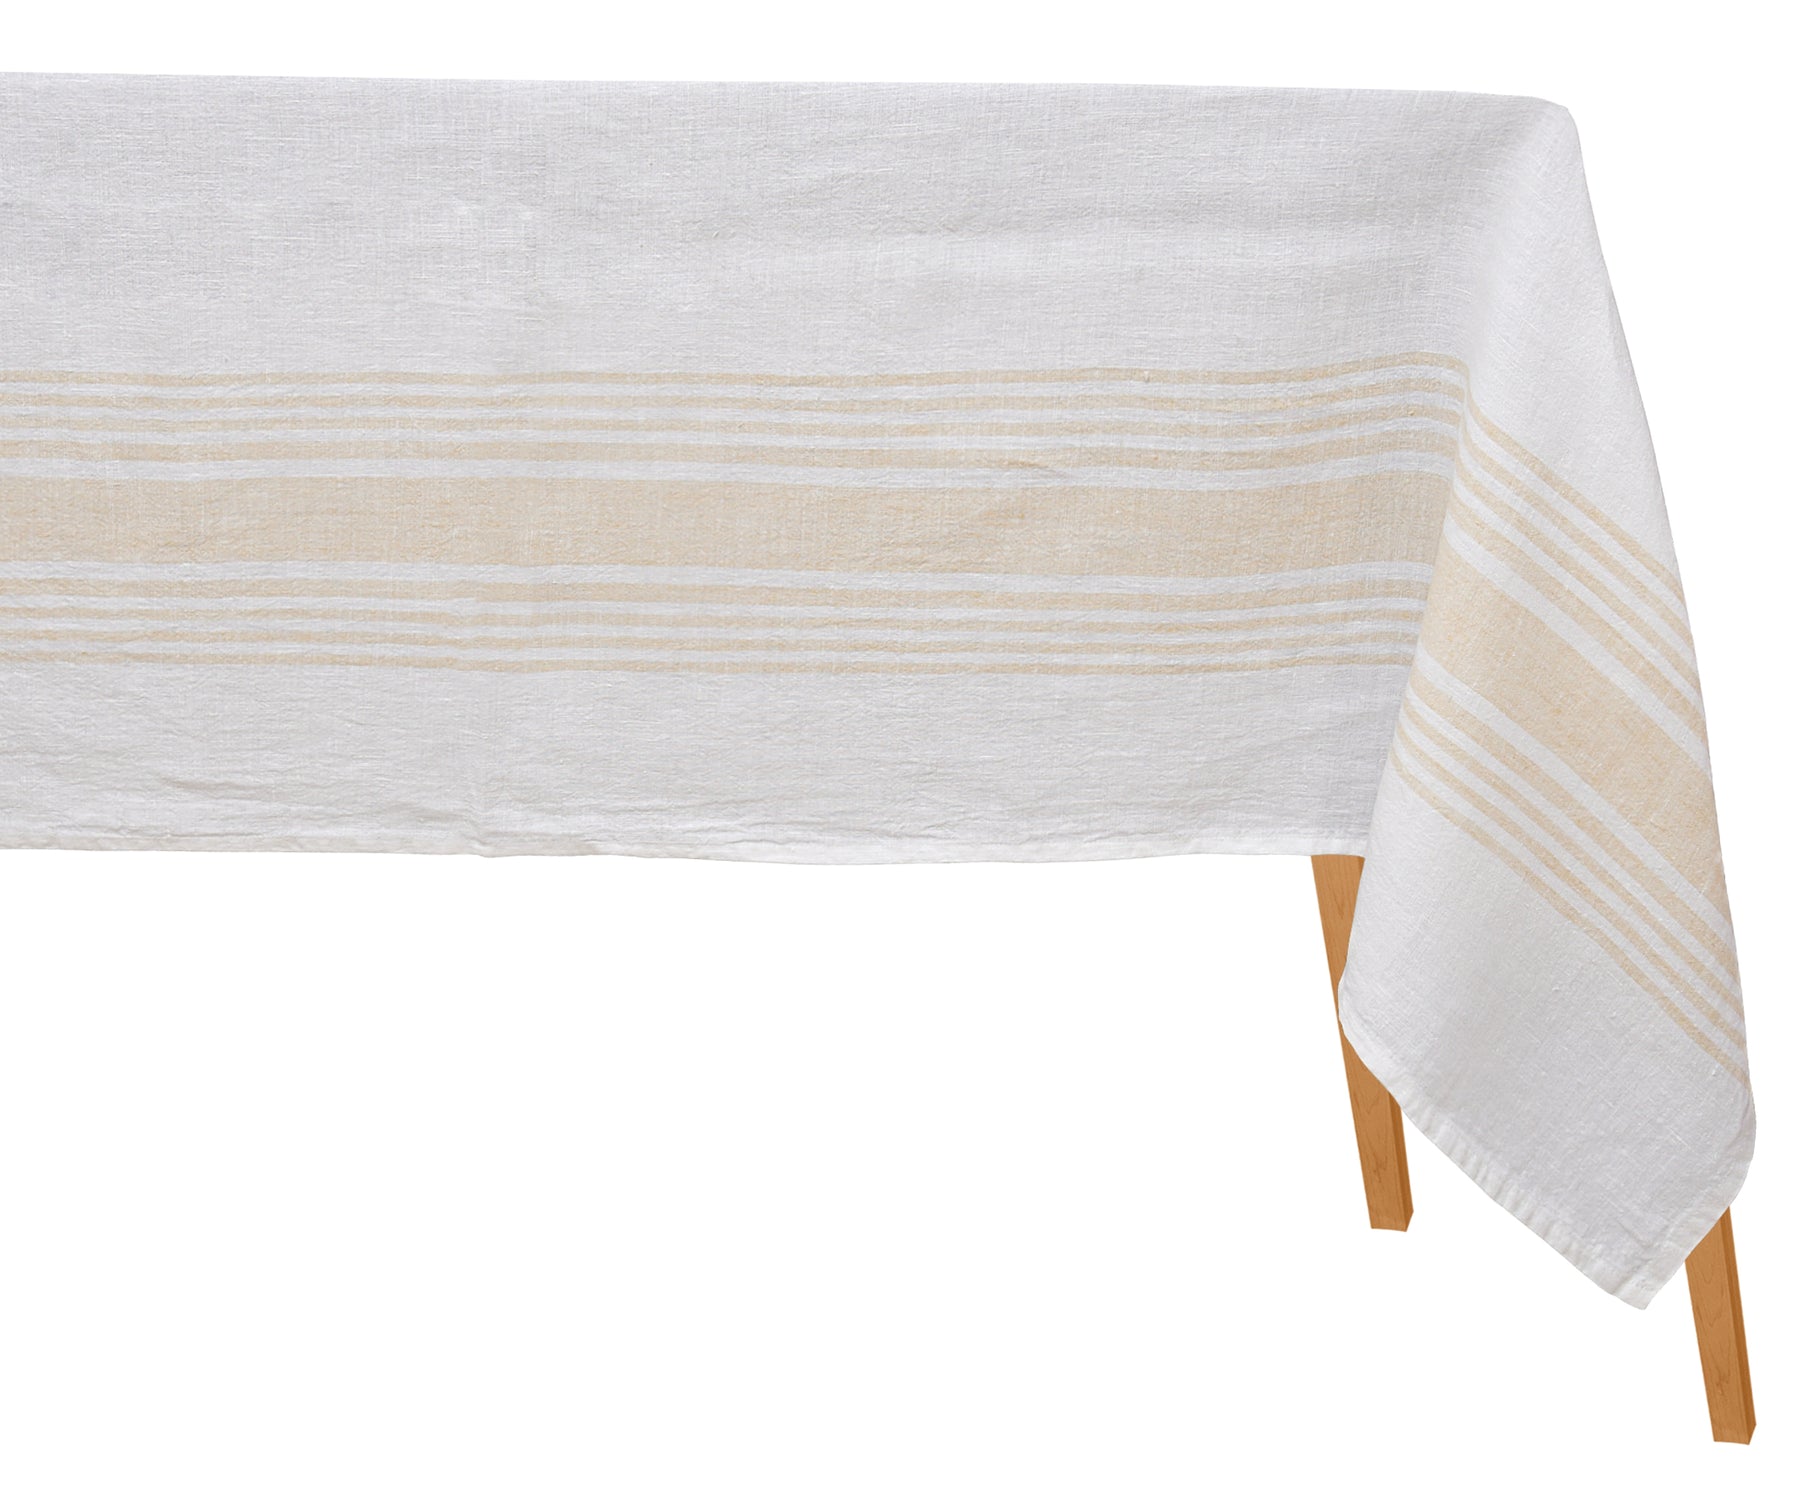 Elegant white linen tablecloth featuring delicate stripe detailing